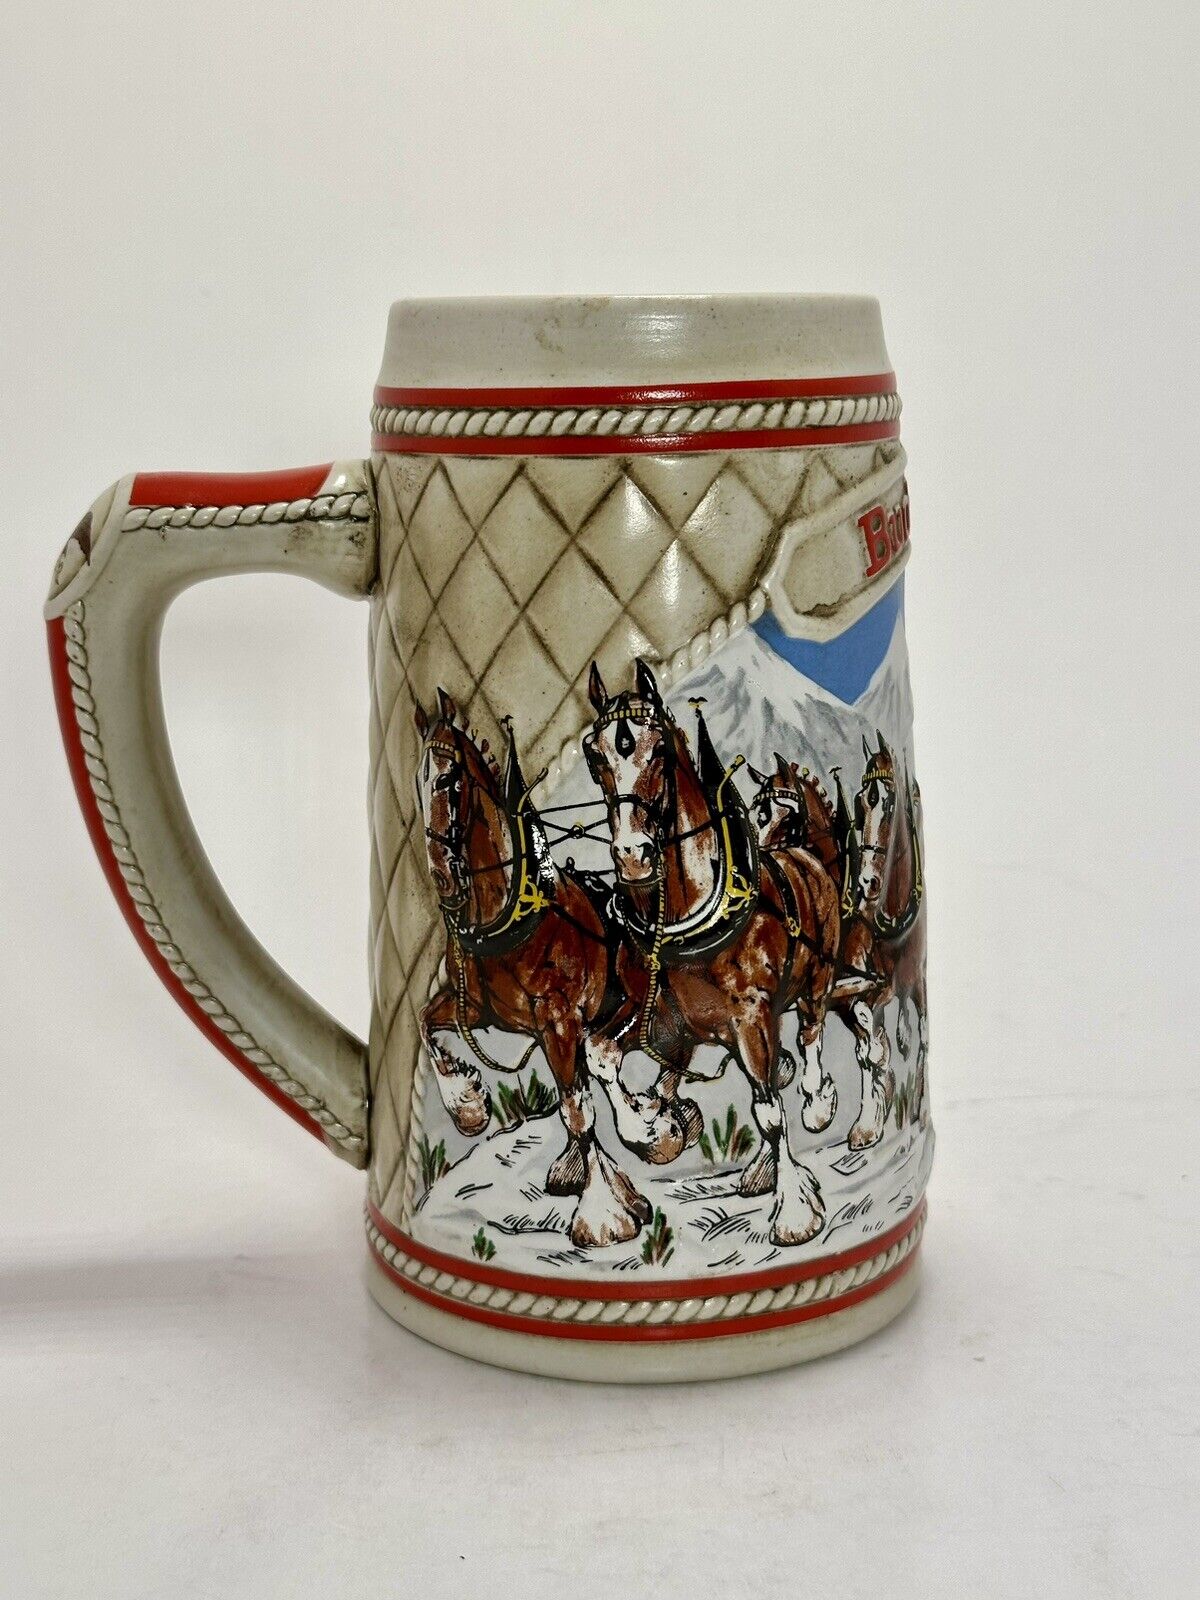 1985 Vintage Budweiser Beer Stein  Clydesdale Holiday A Series